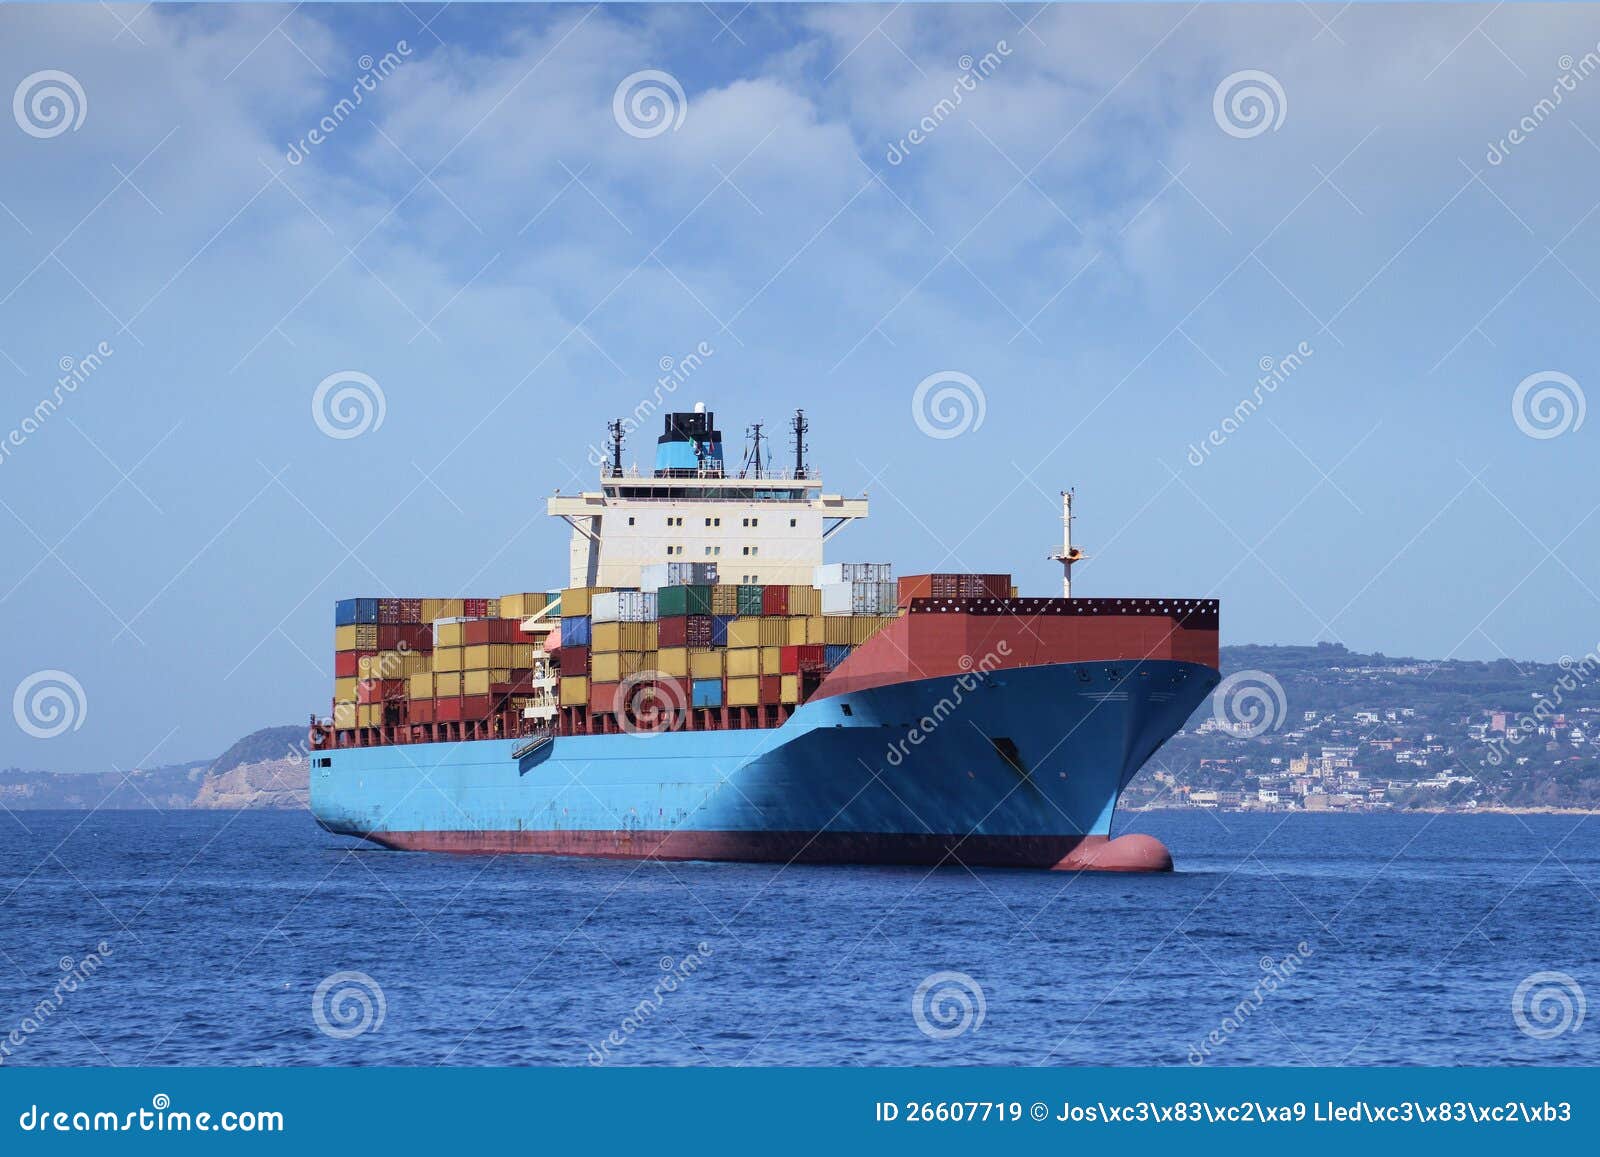 containers transport, starboard side